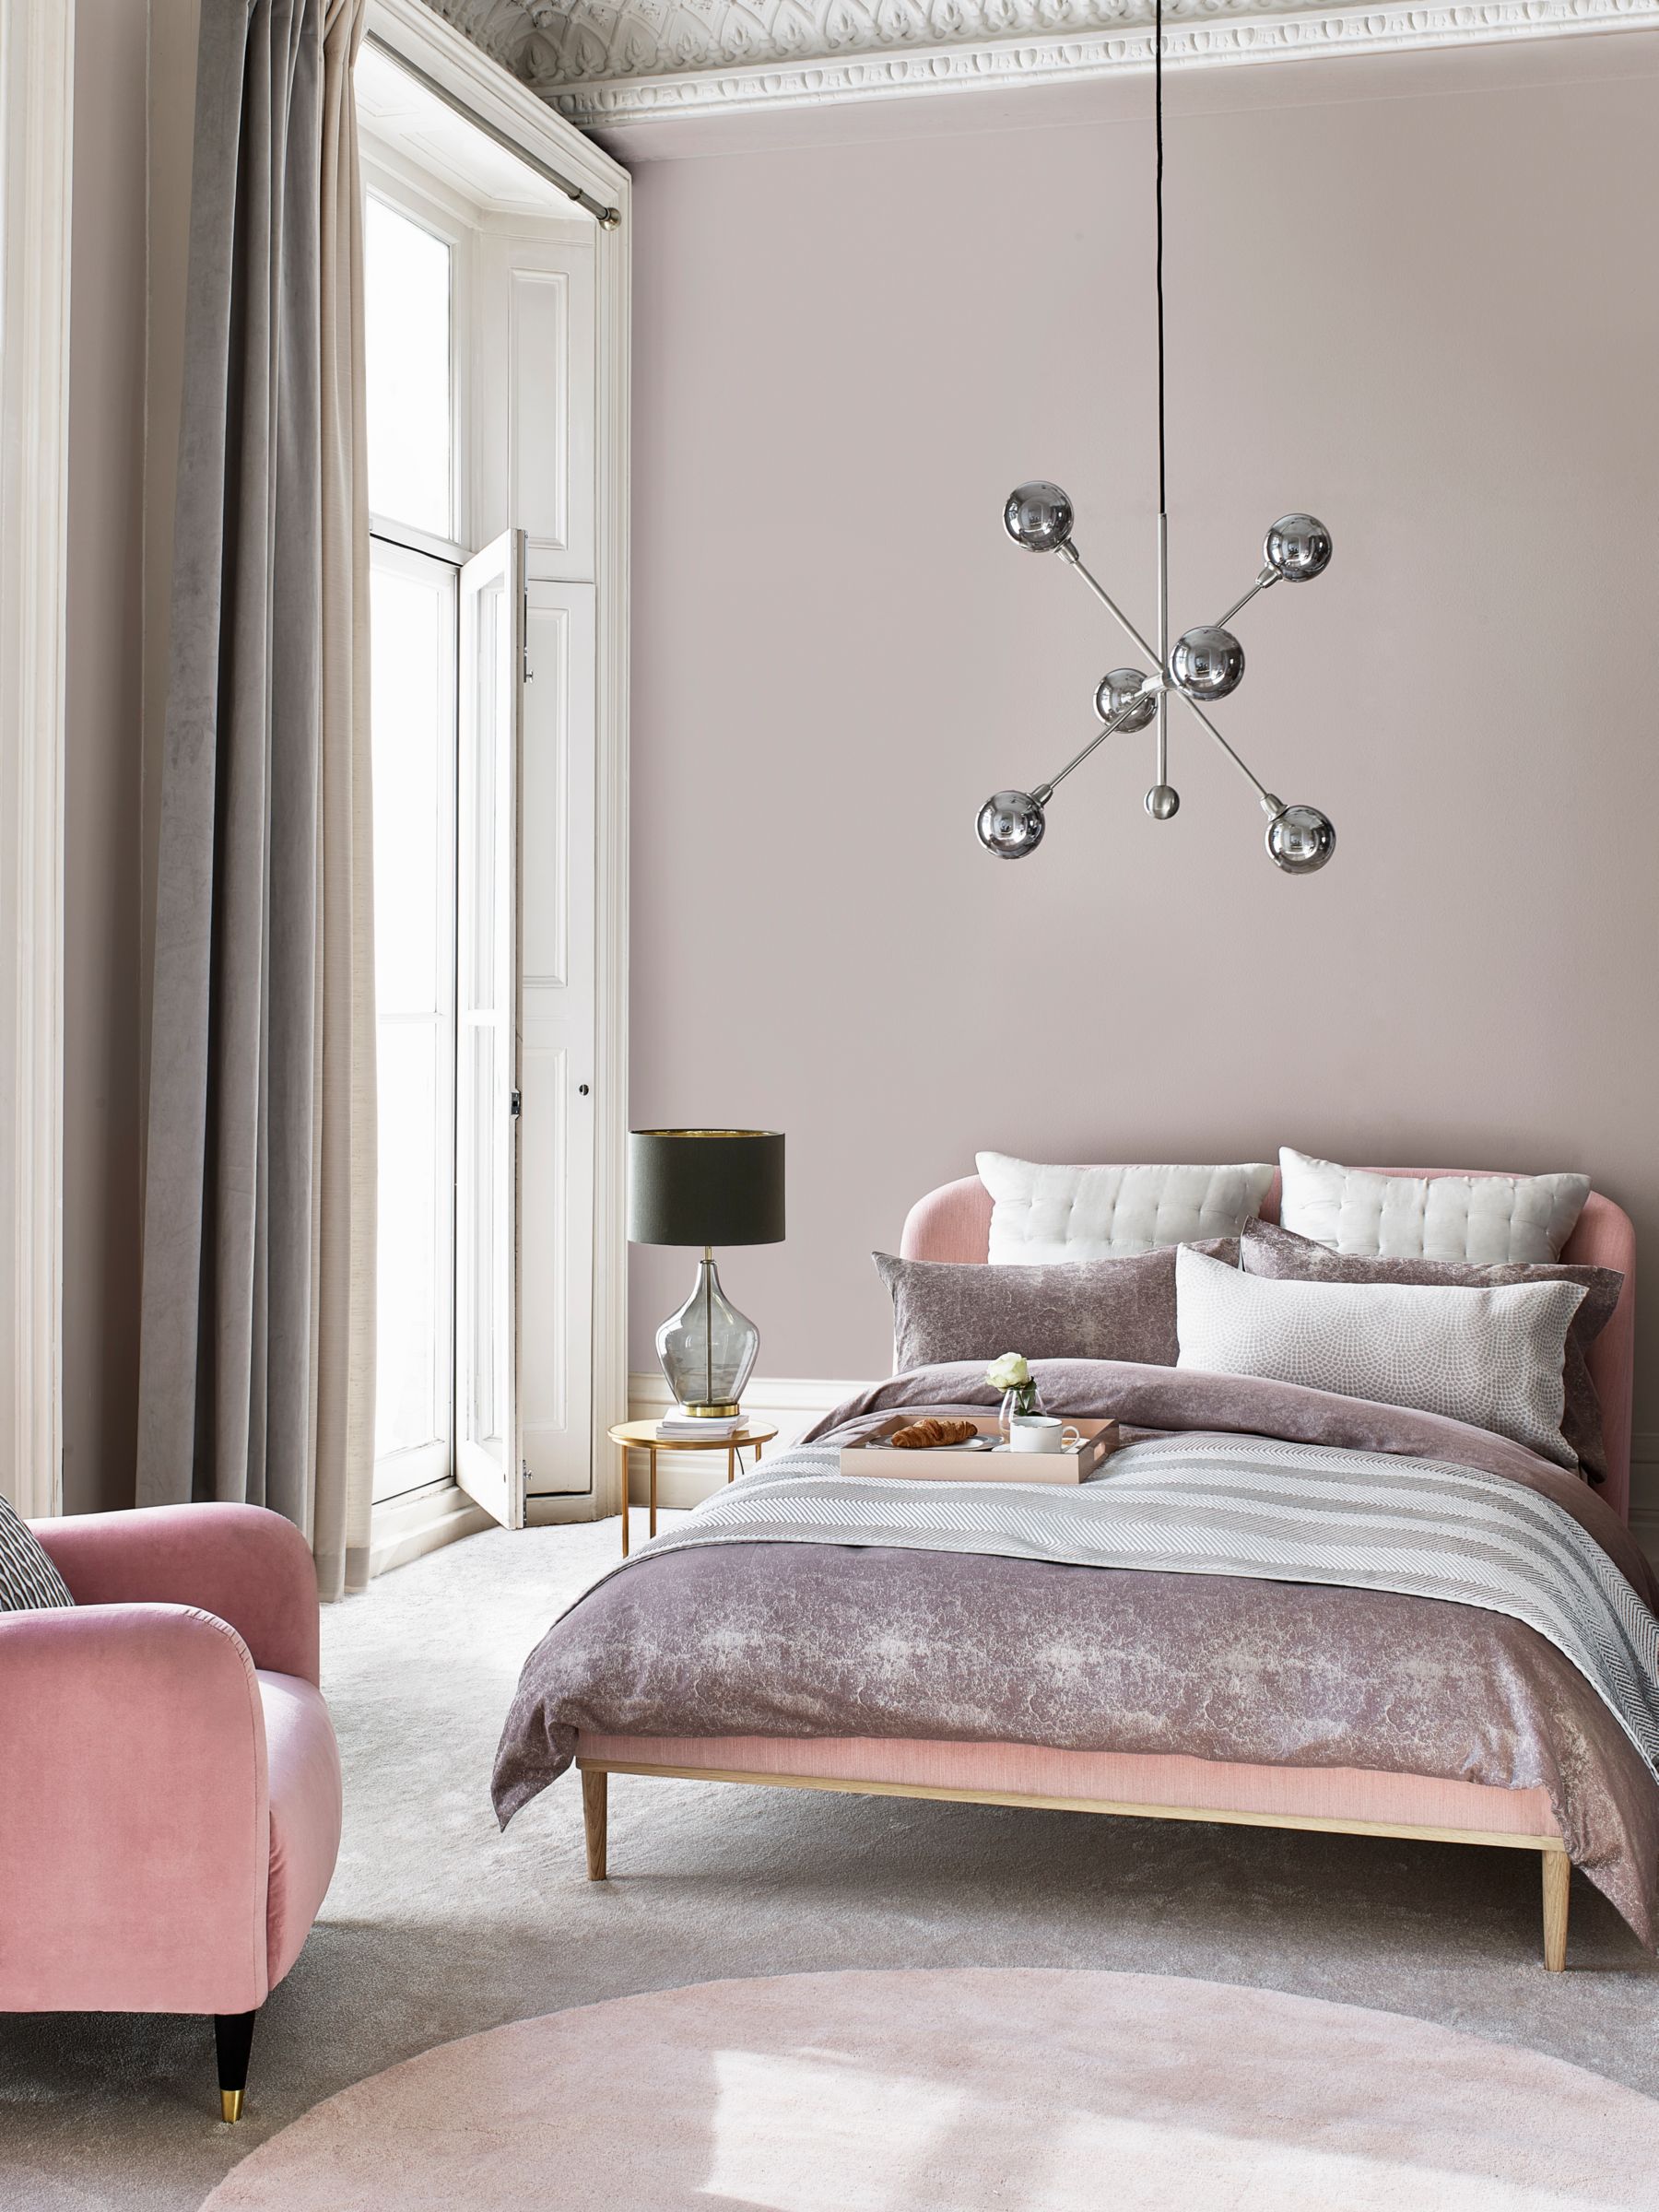 Pink bed and accent chair